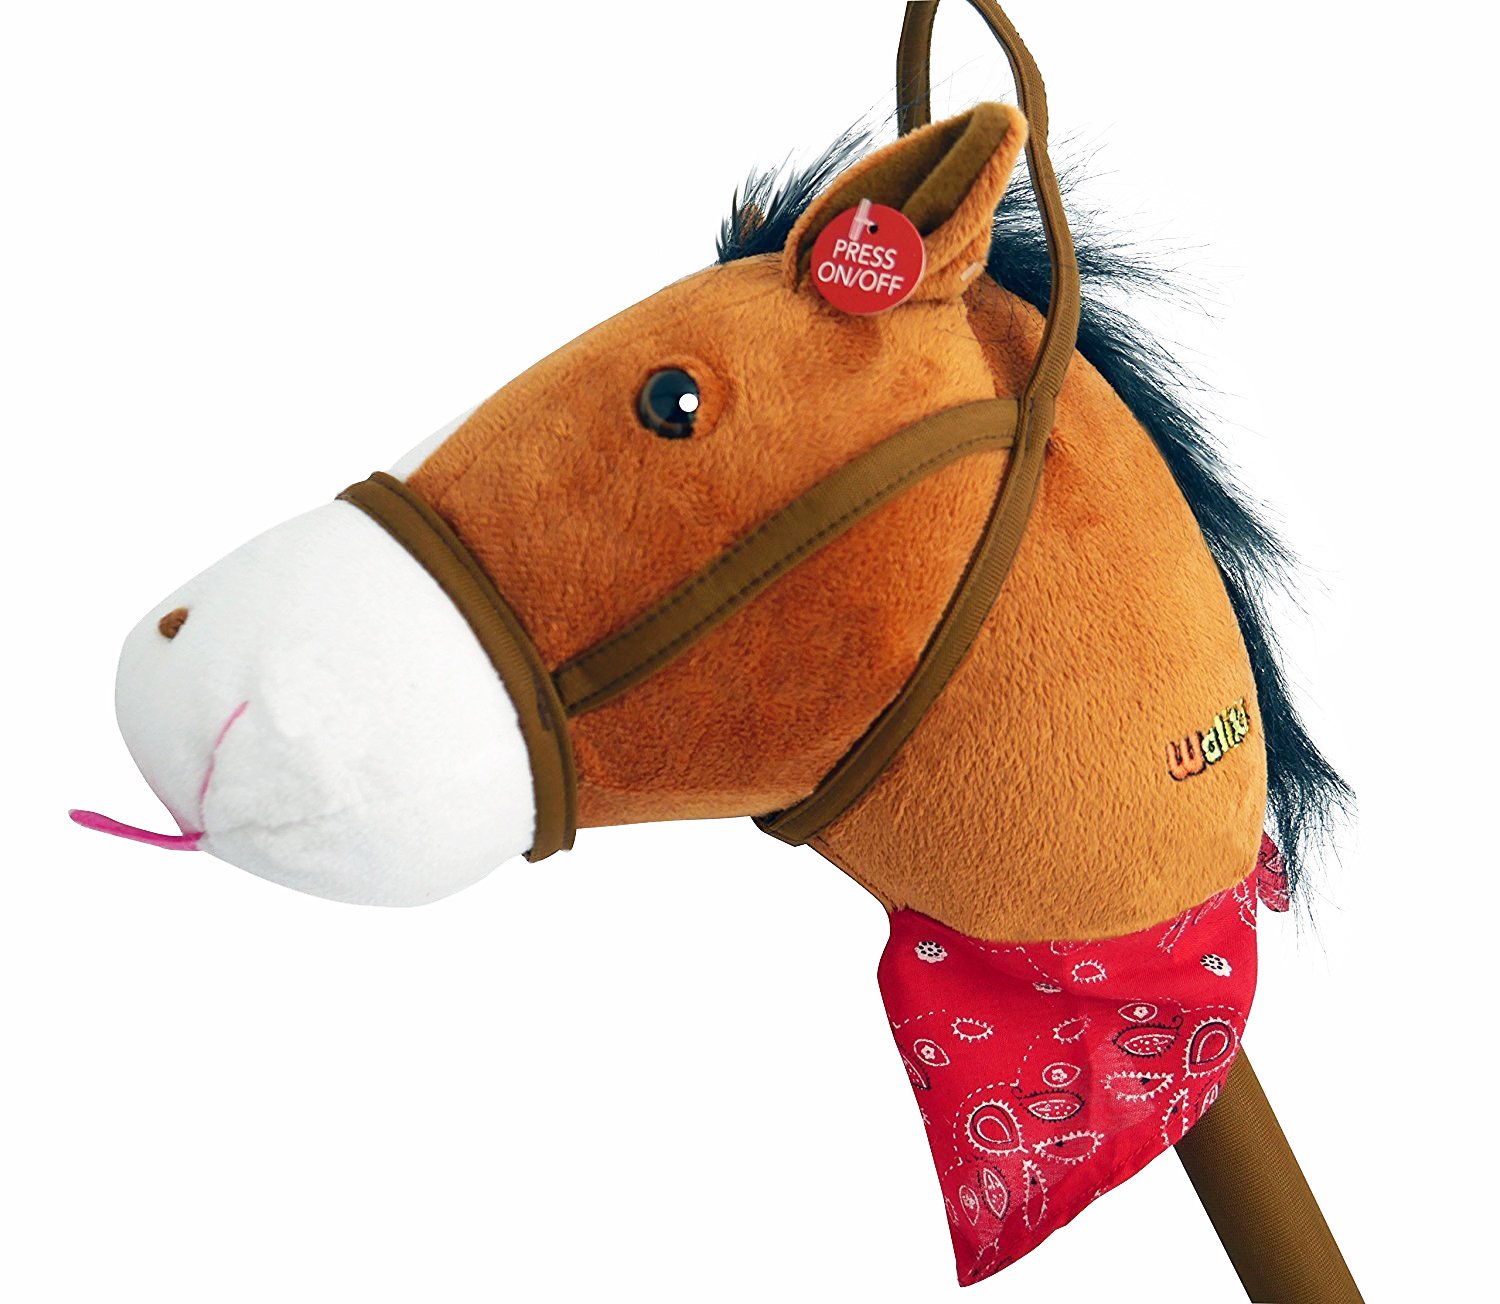 WALIKI Toys Stick Horse (Plush with Sound, for Kids and Toddlers)